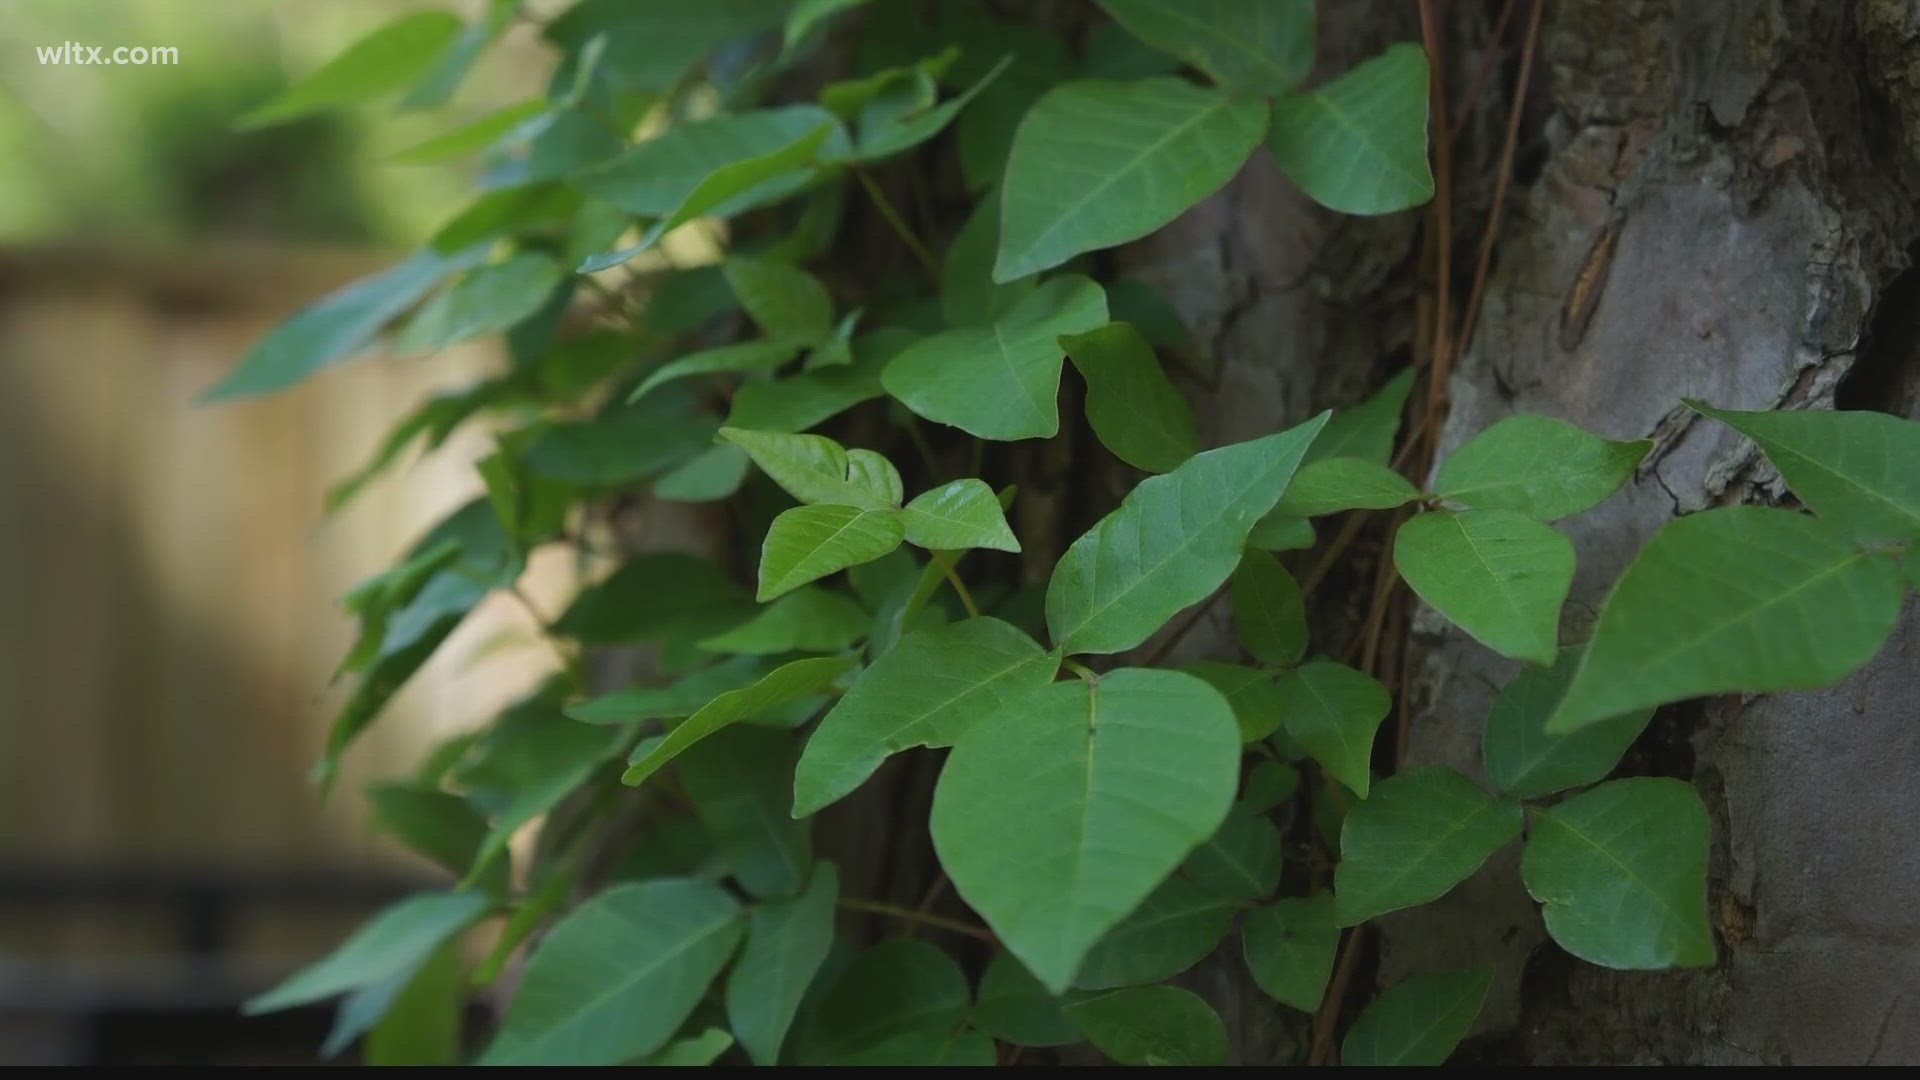 The plant is known for causing itchy rashes and irritation, but as the Earth’s temperature rises, poison ivy is becoming more abundant and potent.